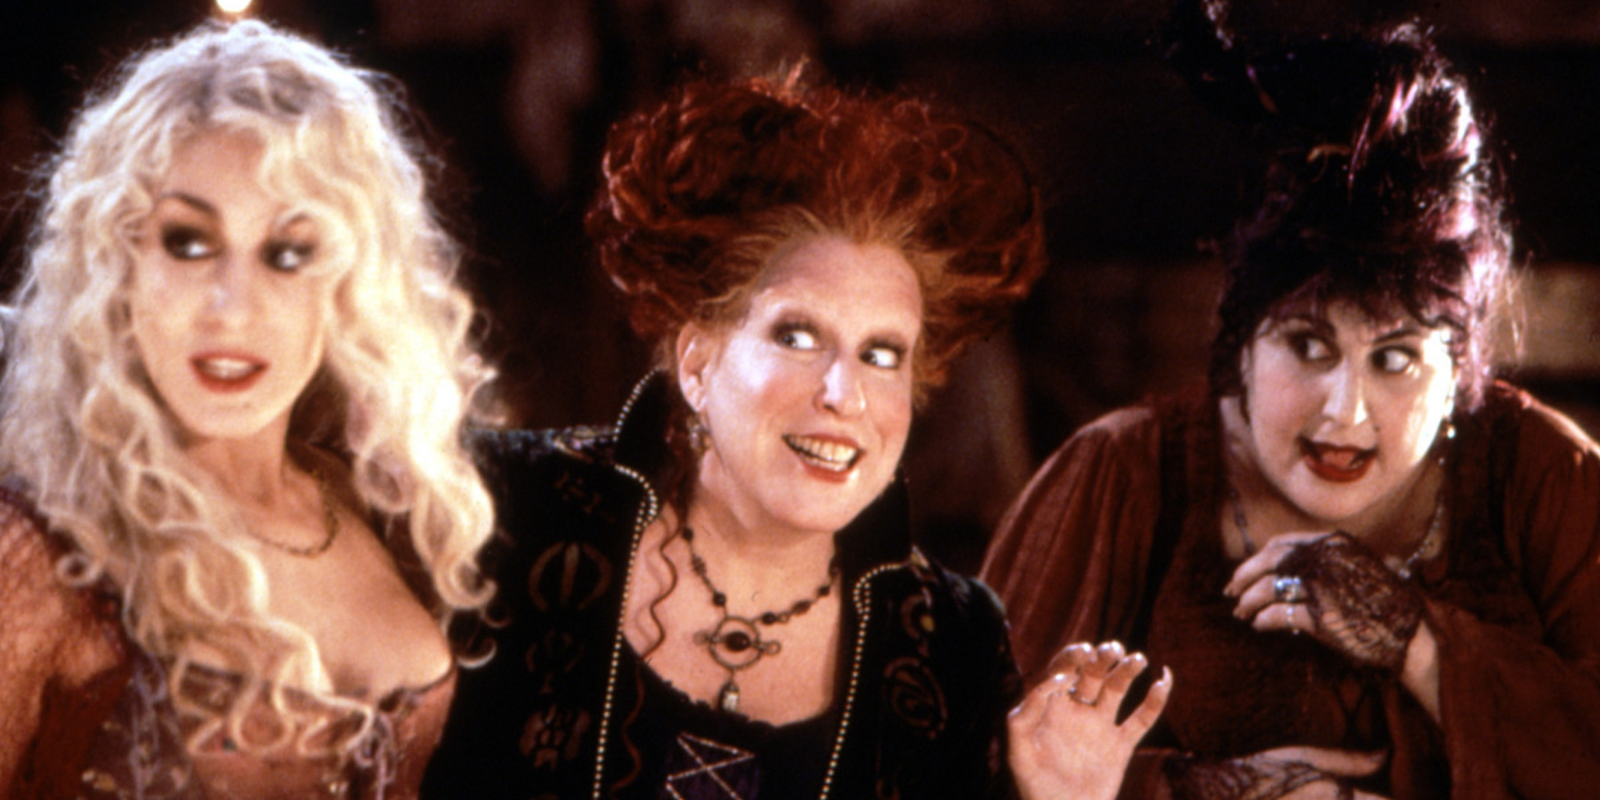 Toil & [Legal] Trouble: The Sanderson Sisters' Legal Consequences